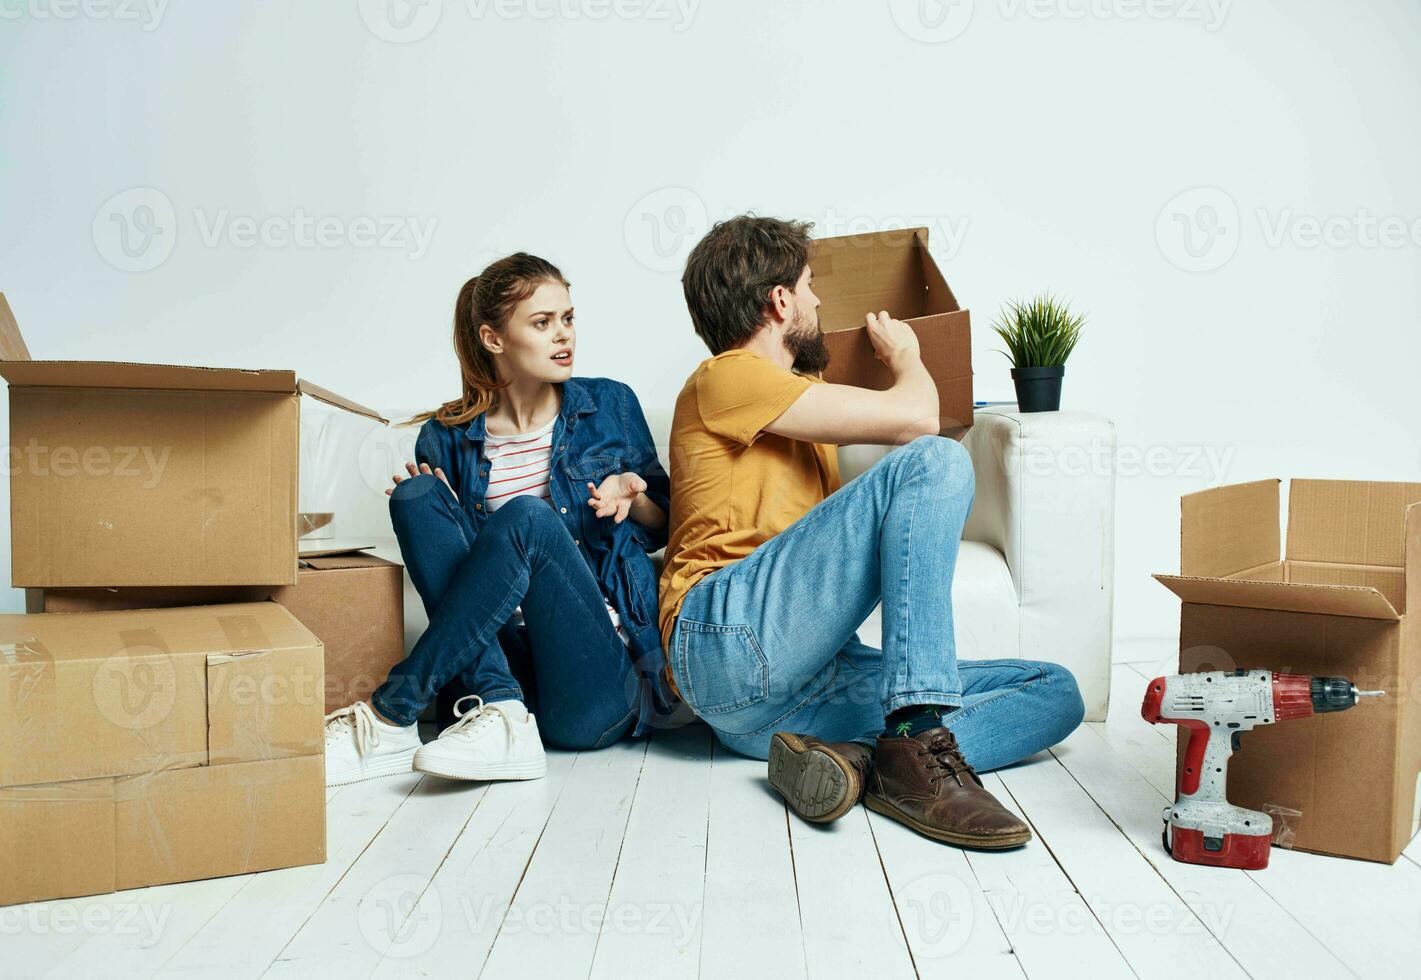 man and woman moving apartment flower potted and boxes repair tools photo